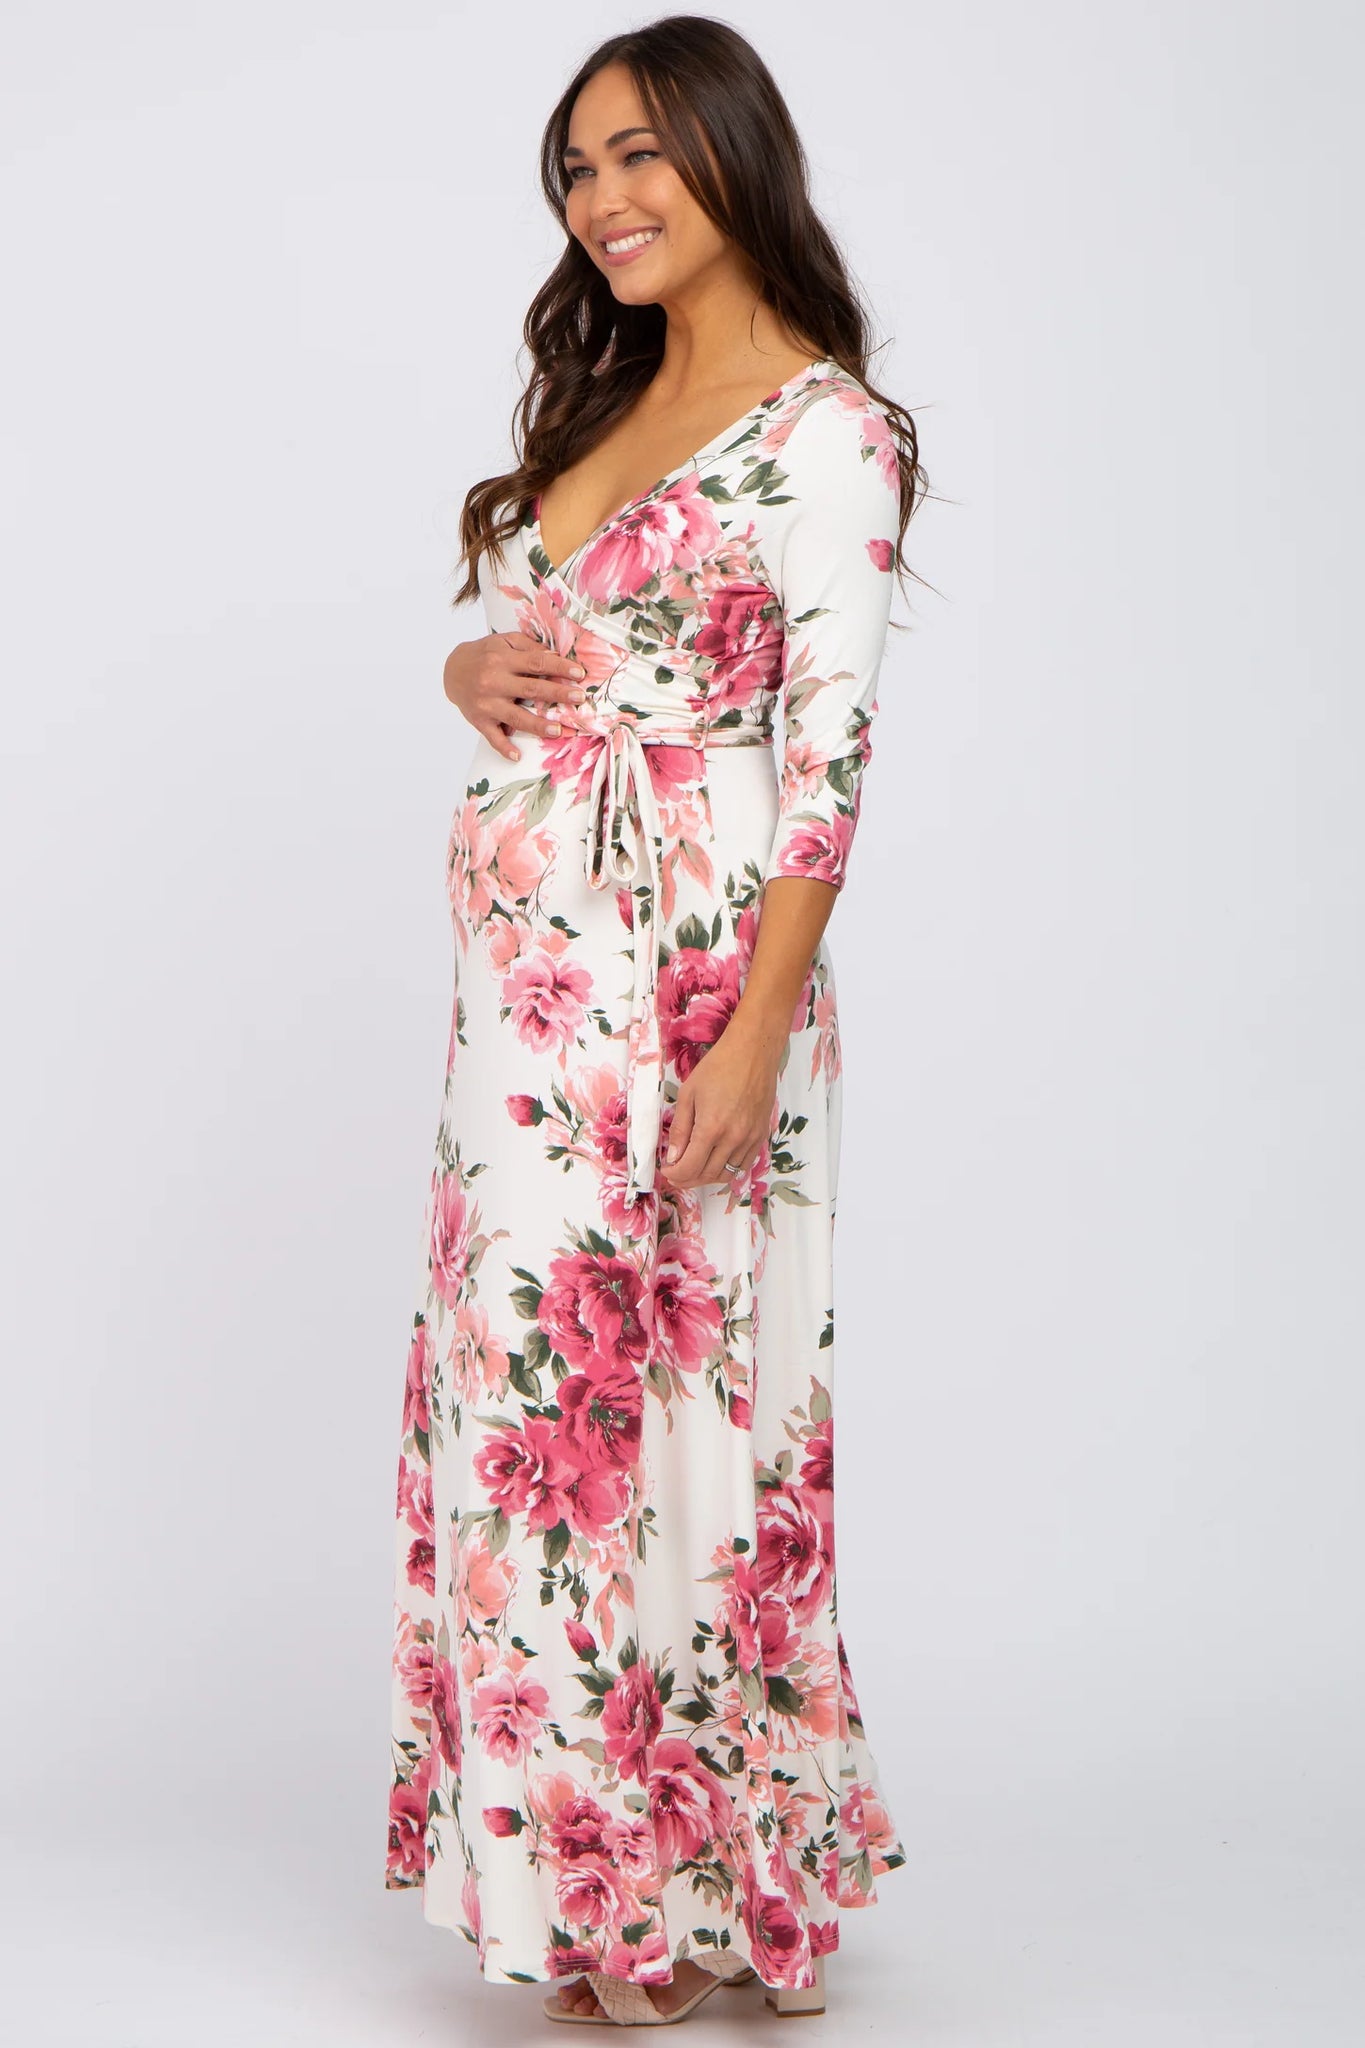 The Best Cute Pregnancy Outfits For Baby Shower – EasyJug